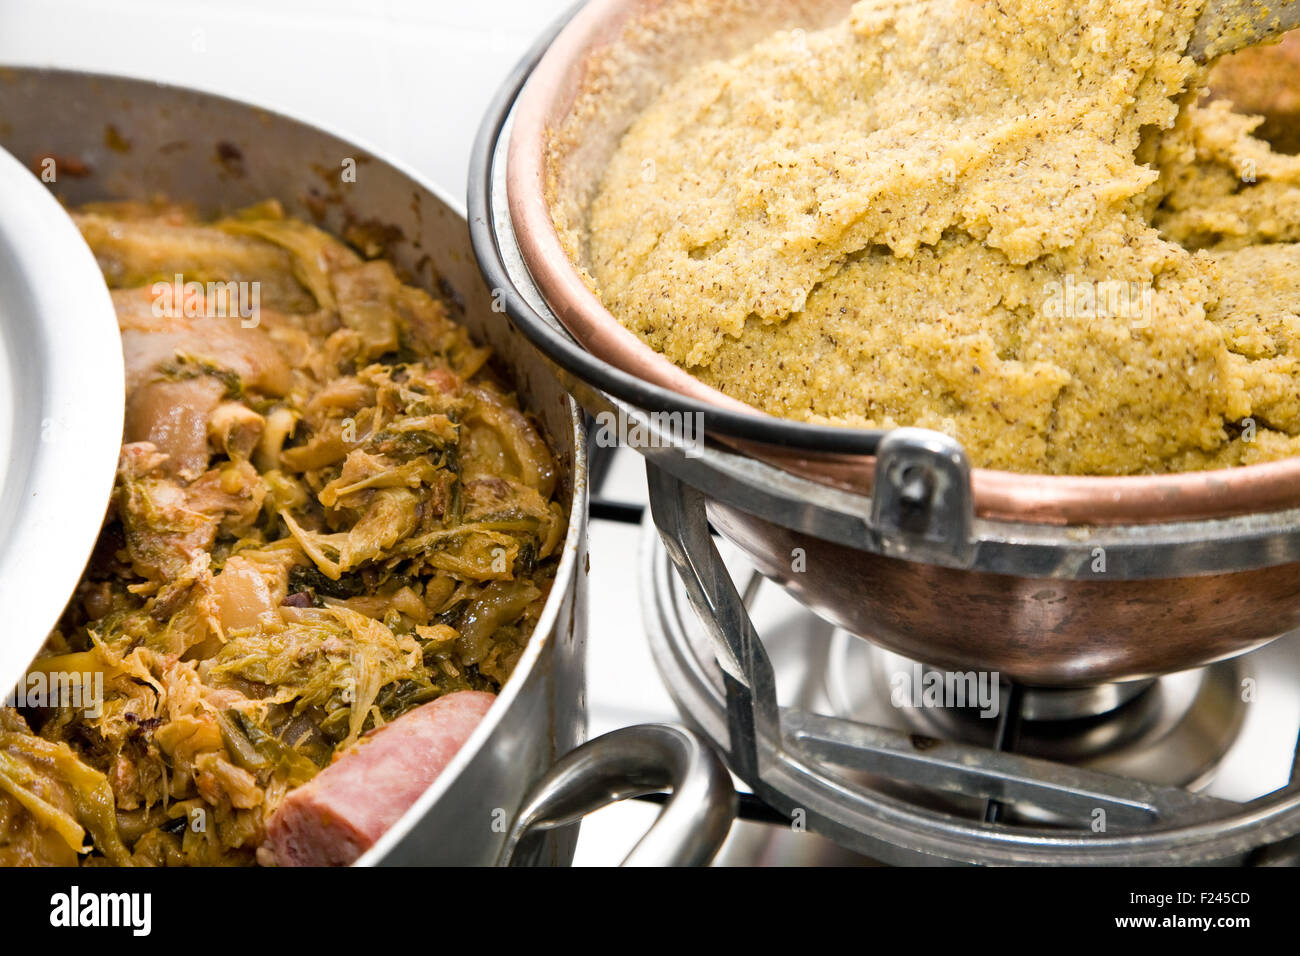 Cassoeula and polenta, a typical northern Italian dish from Lombardy, Italy Stock Photo